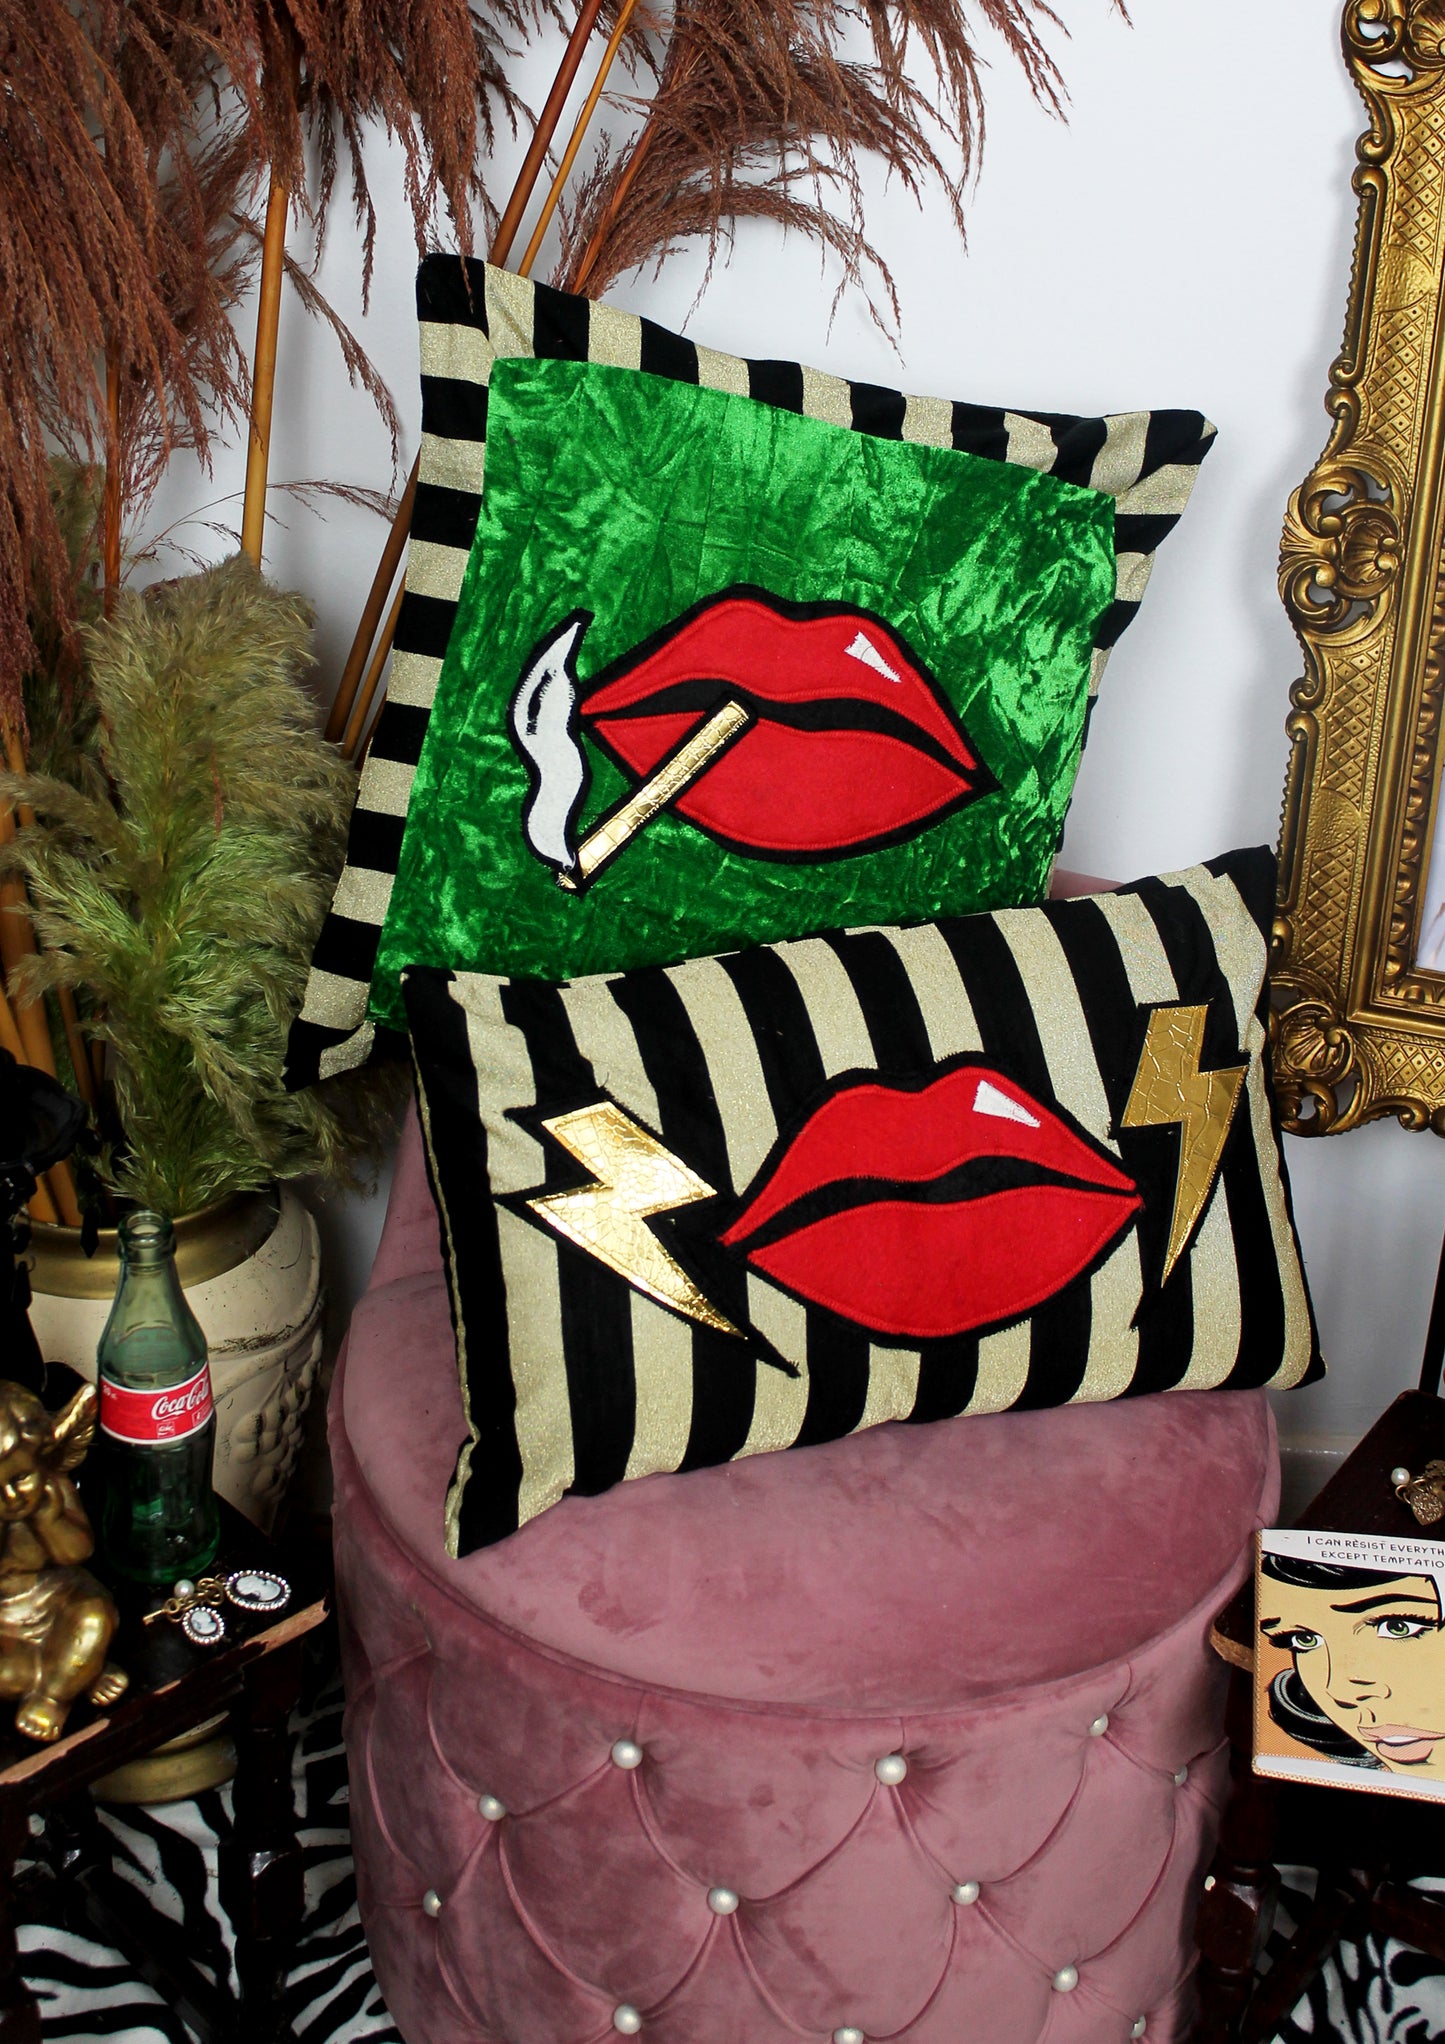 Absinth - Statement green and gold decorative throw cushion with red lips